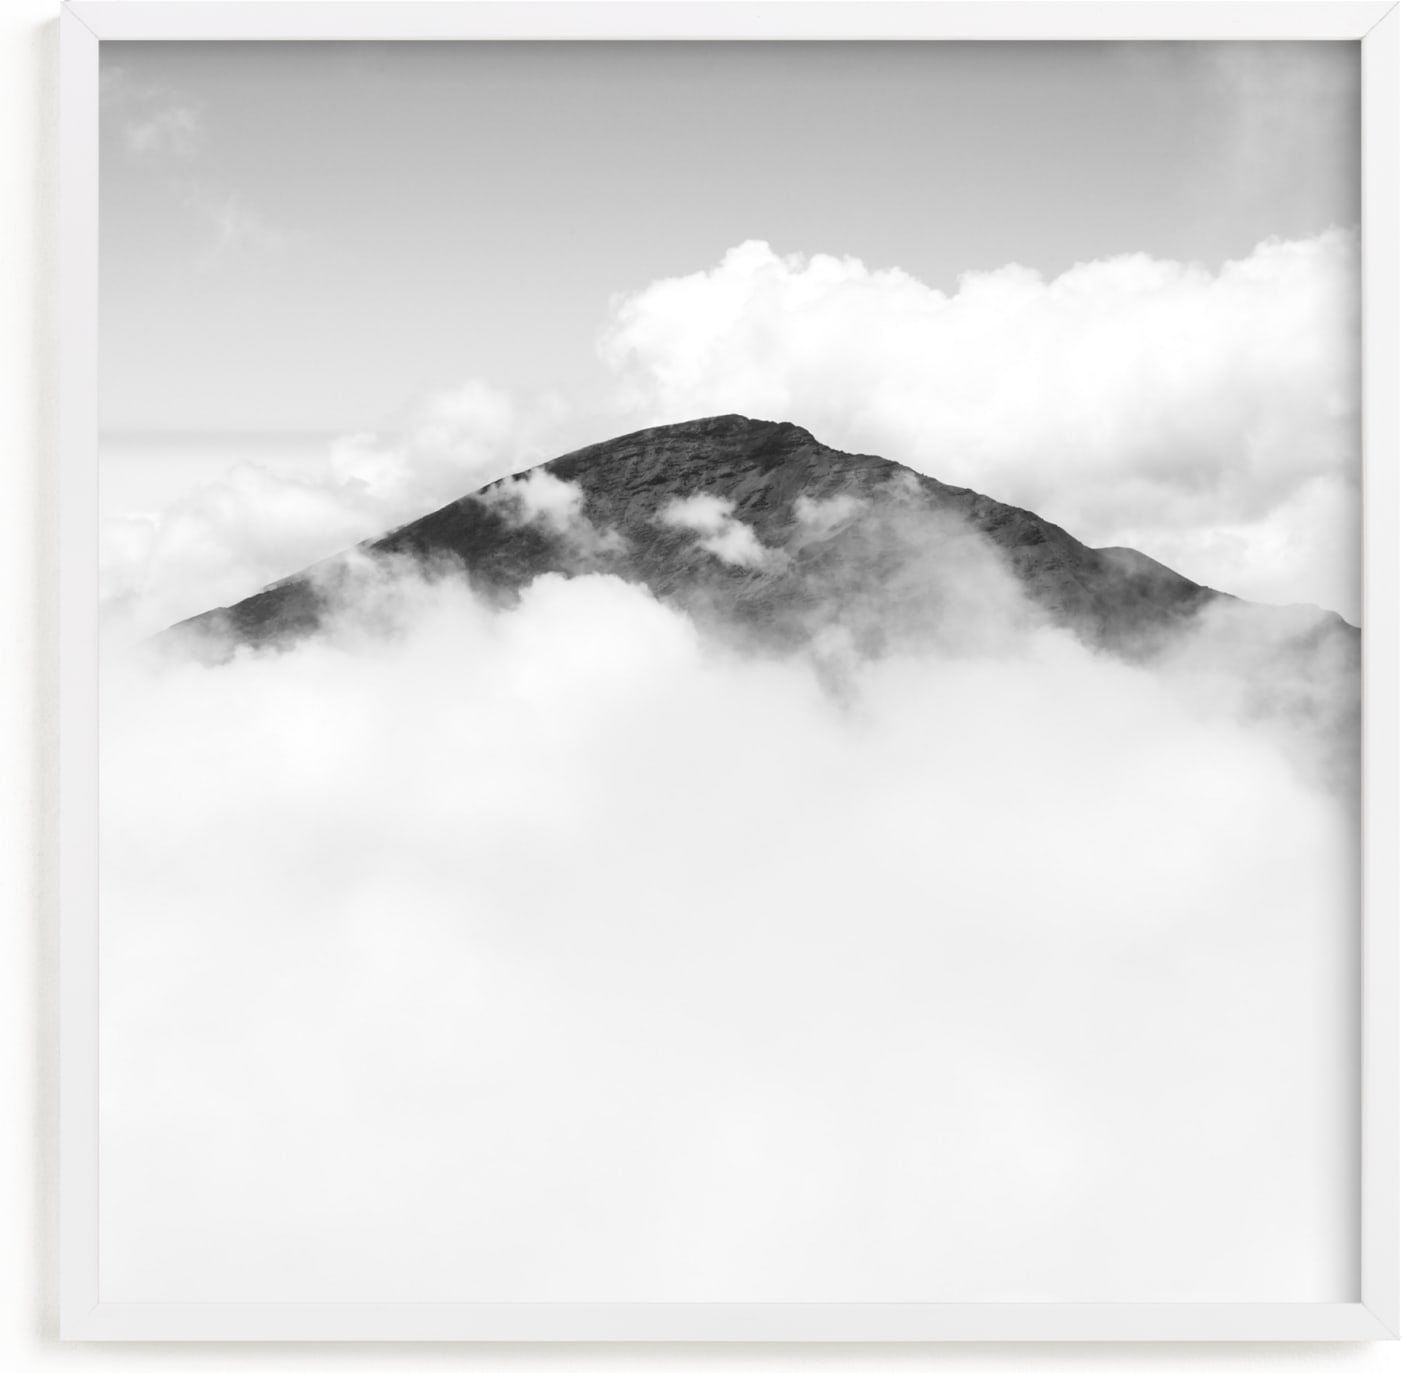 This is a black and white art by Mary Ann Glynn-Tusa called Volcano Hidden in the Clouds 3.